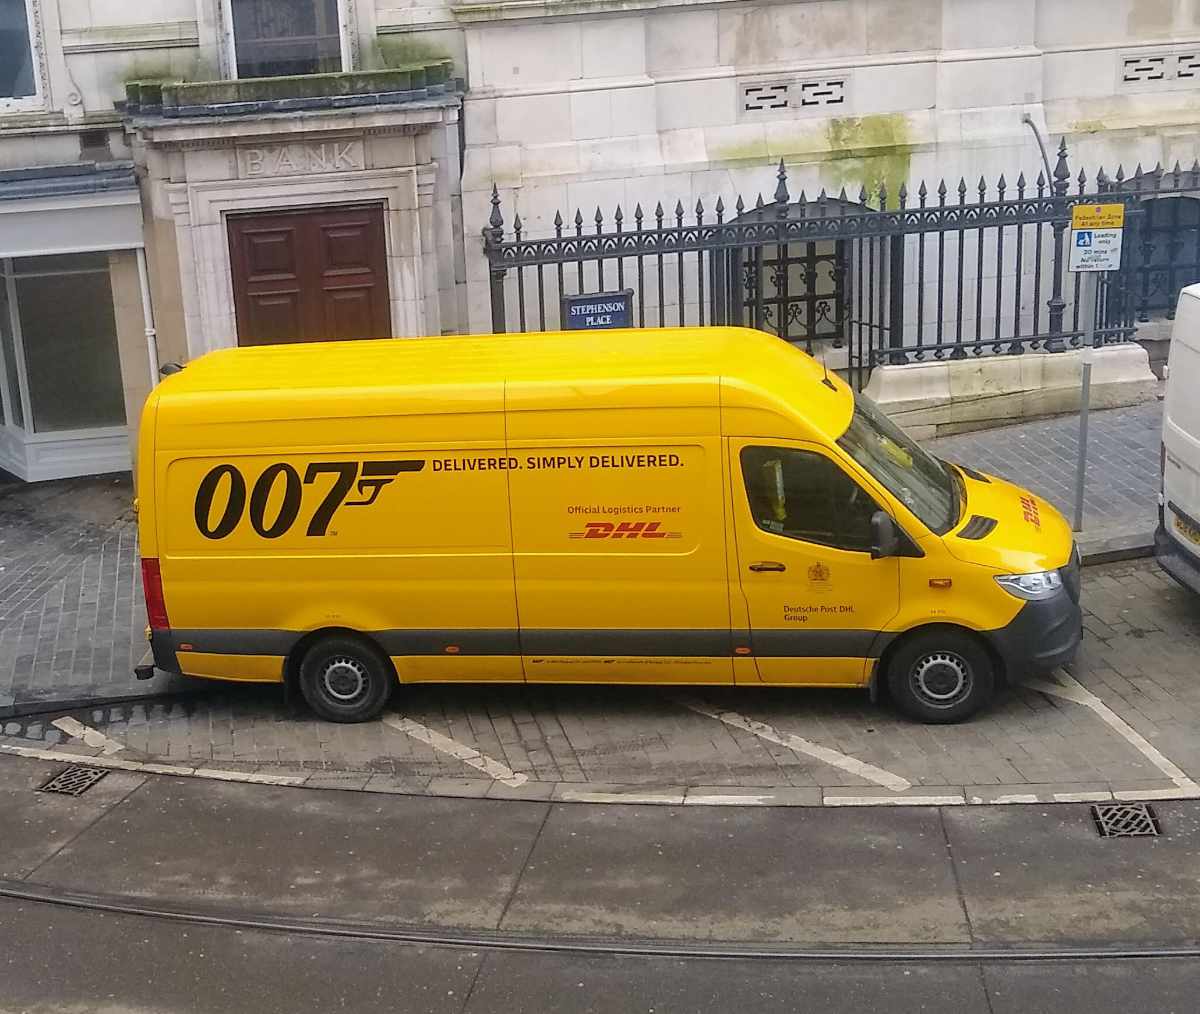 The new Bond vehicle is somewhat of a departure from an Aston Martin. Austerity cuts have hit MI6